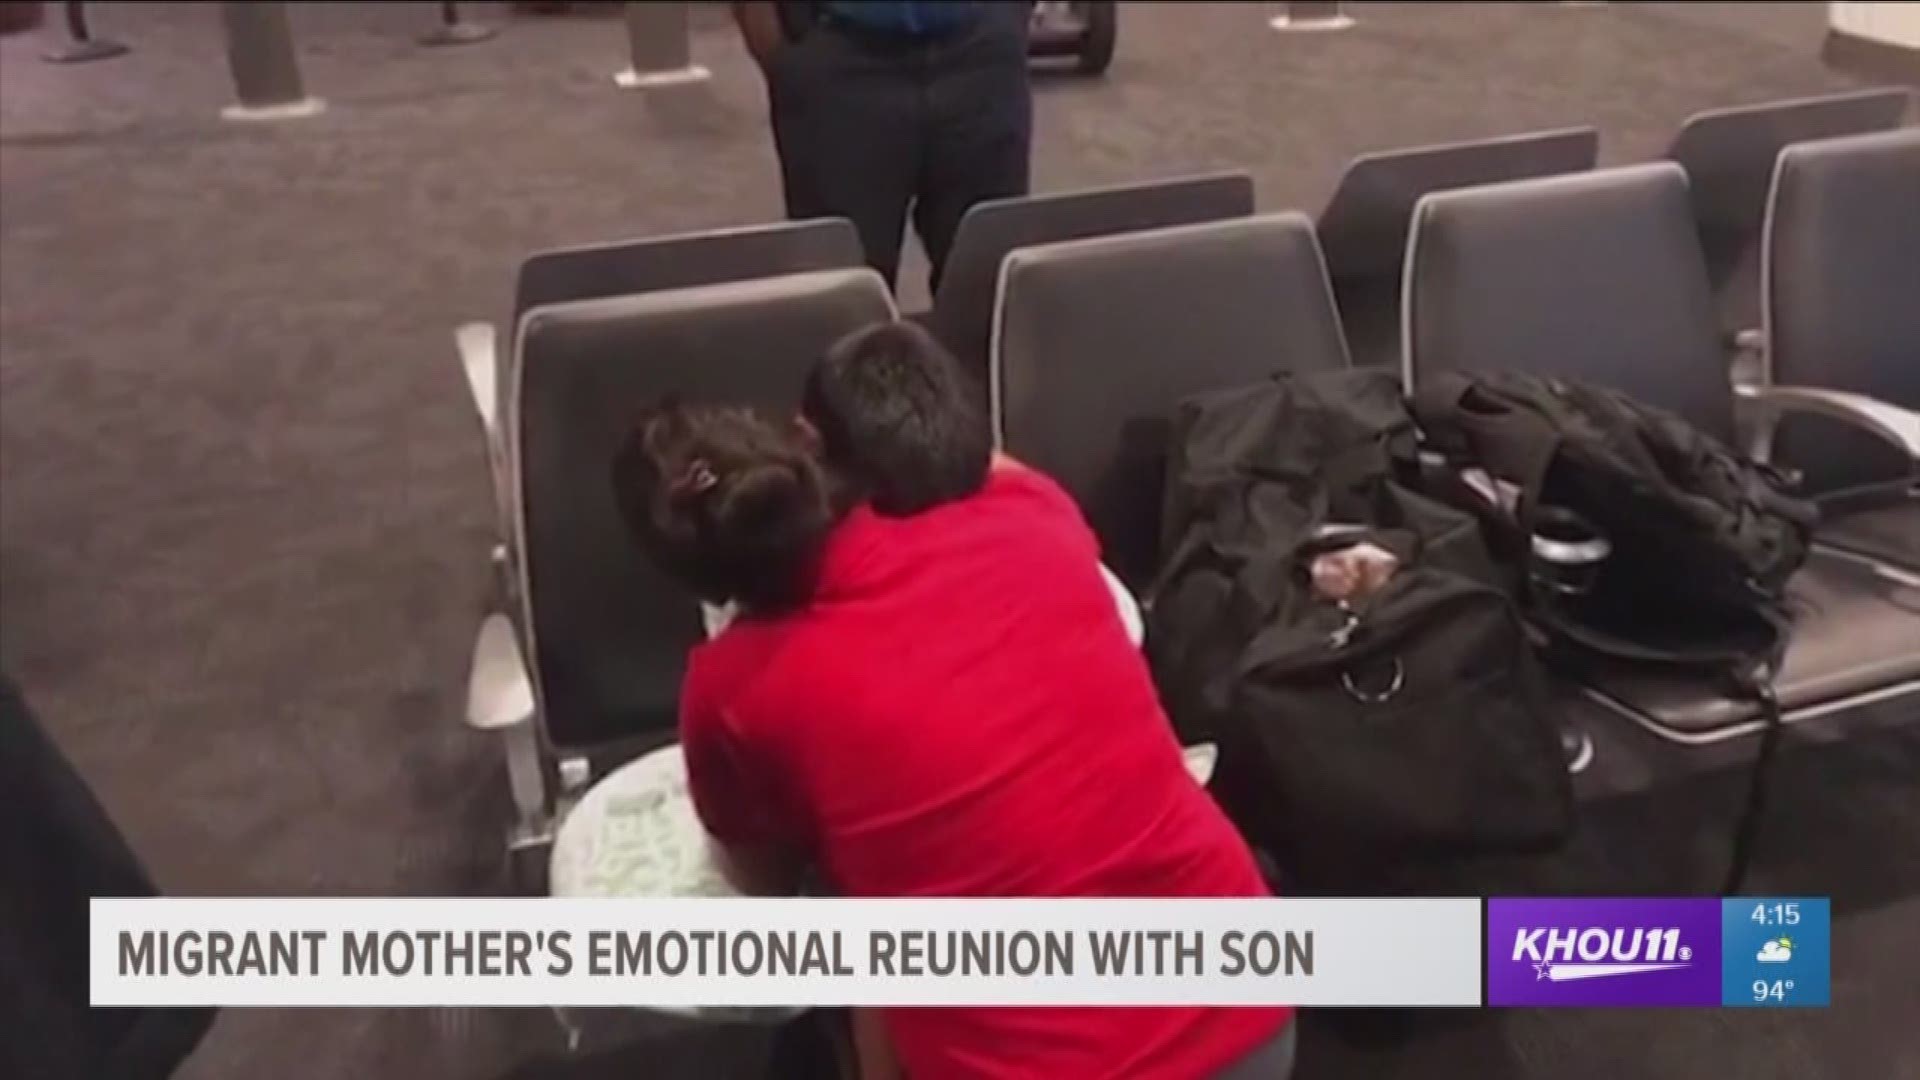 A mother from Guatemala sobbed when she was reunited with her son in Baltimore Friday morning after being separated from him last month.